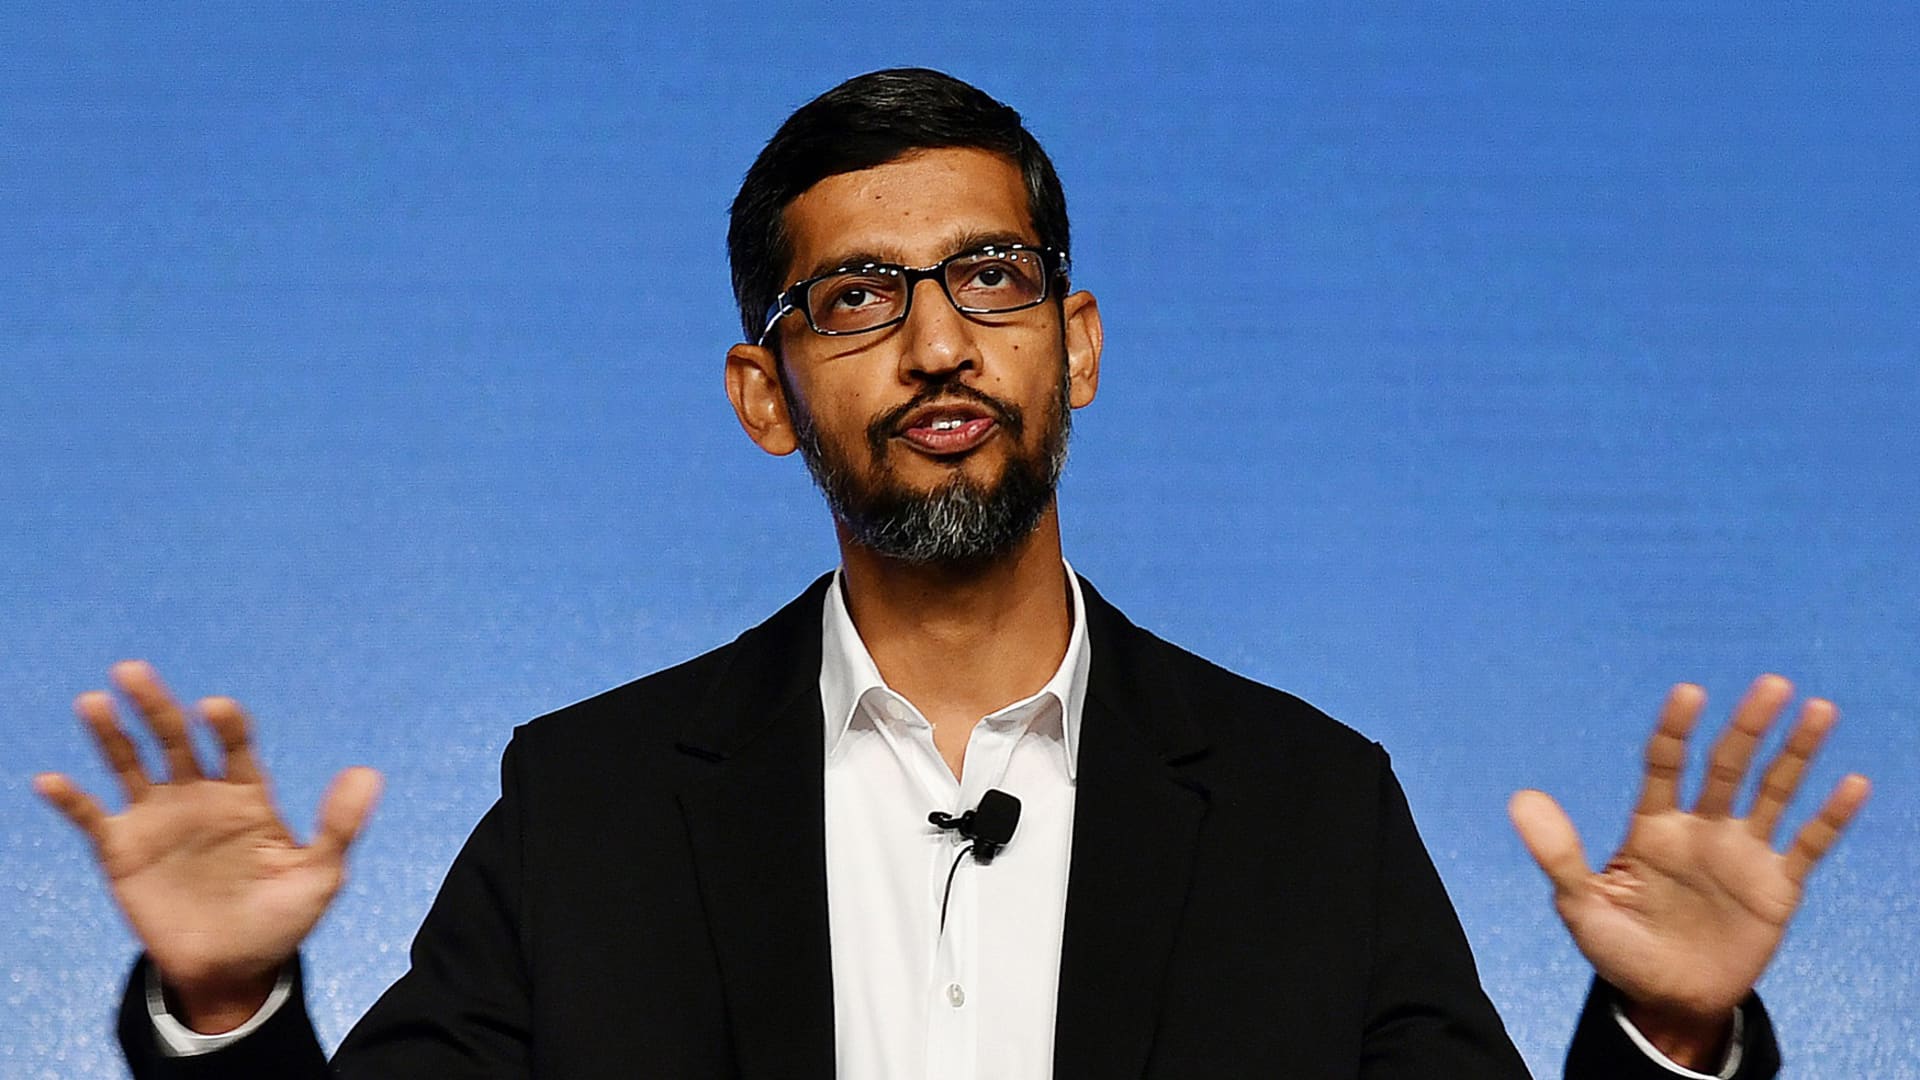 Google employees criticize CEO Sundar Pichai for ‘rushed, botched’ announcement of GPT competitor Bard